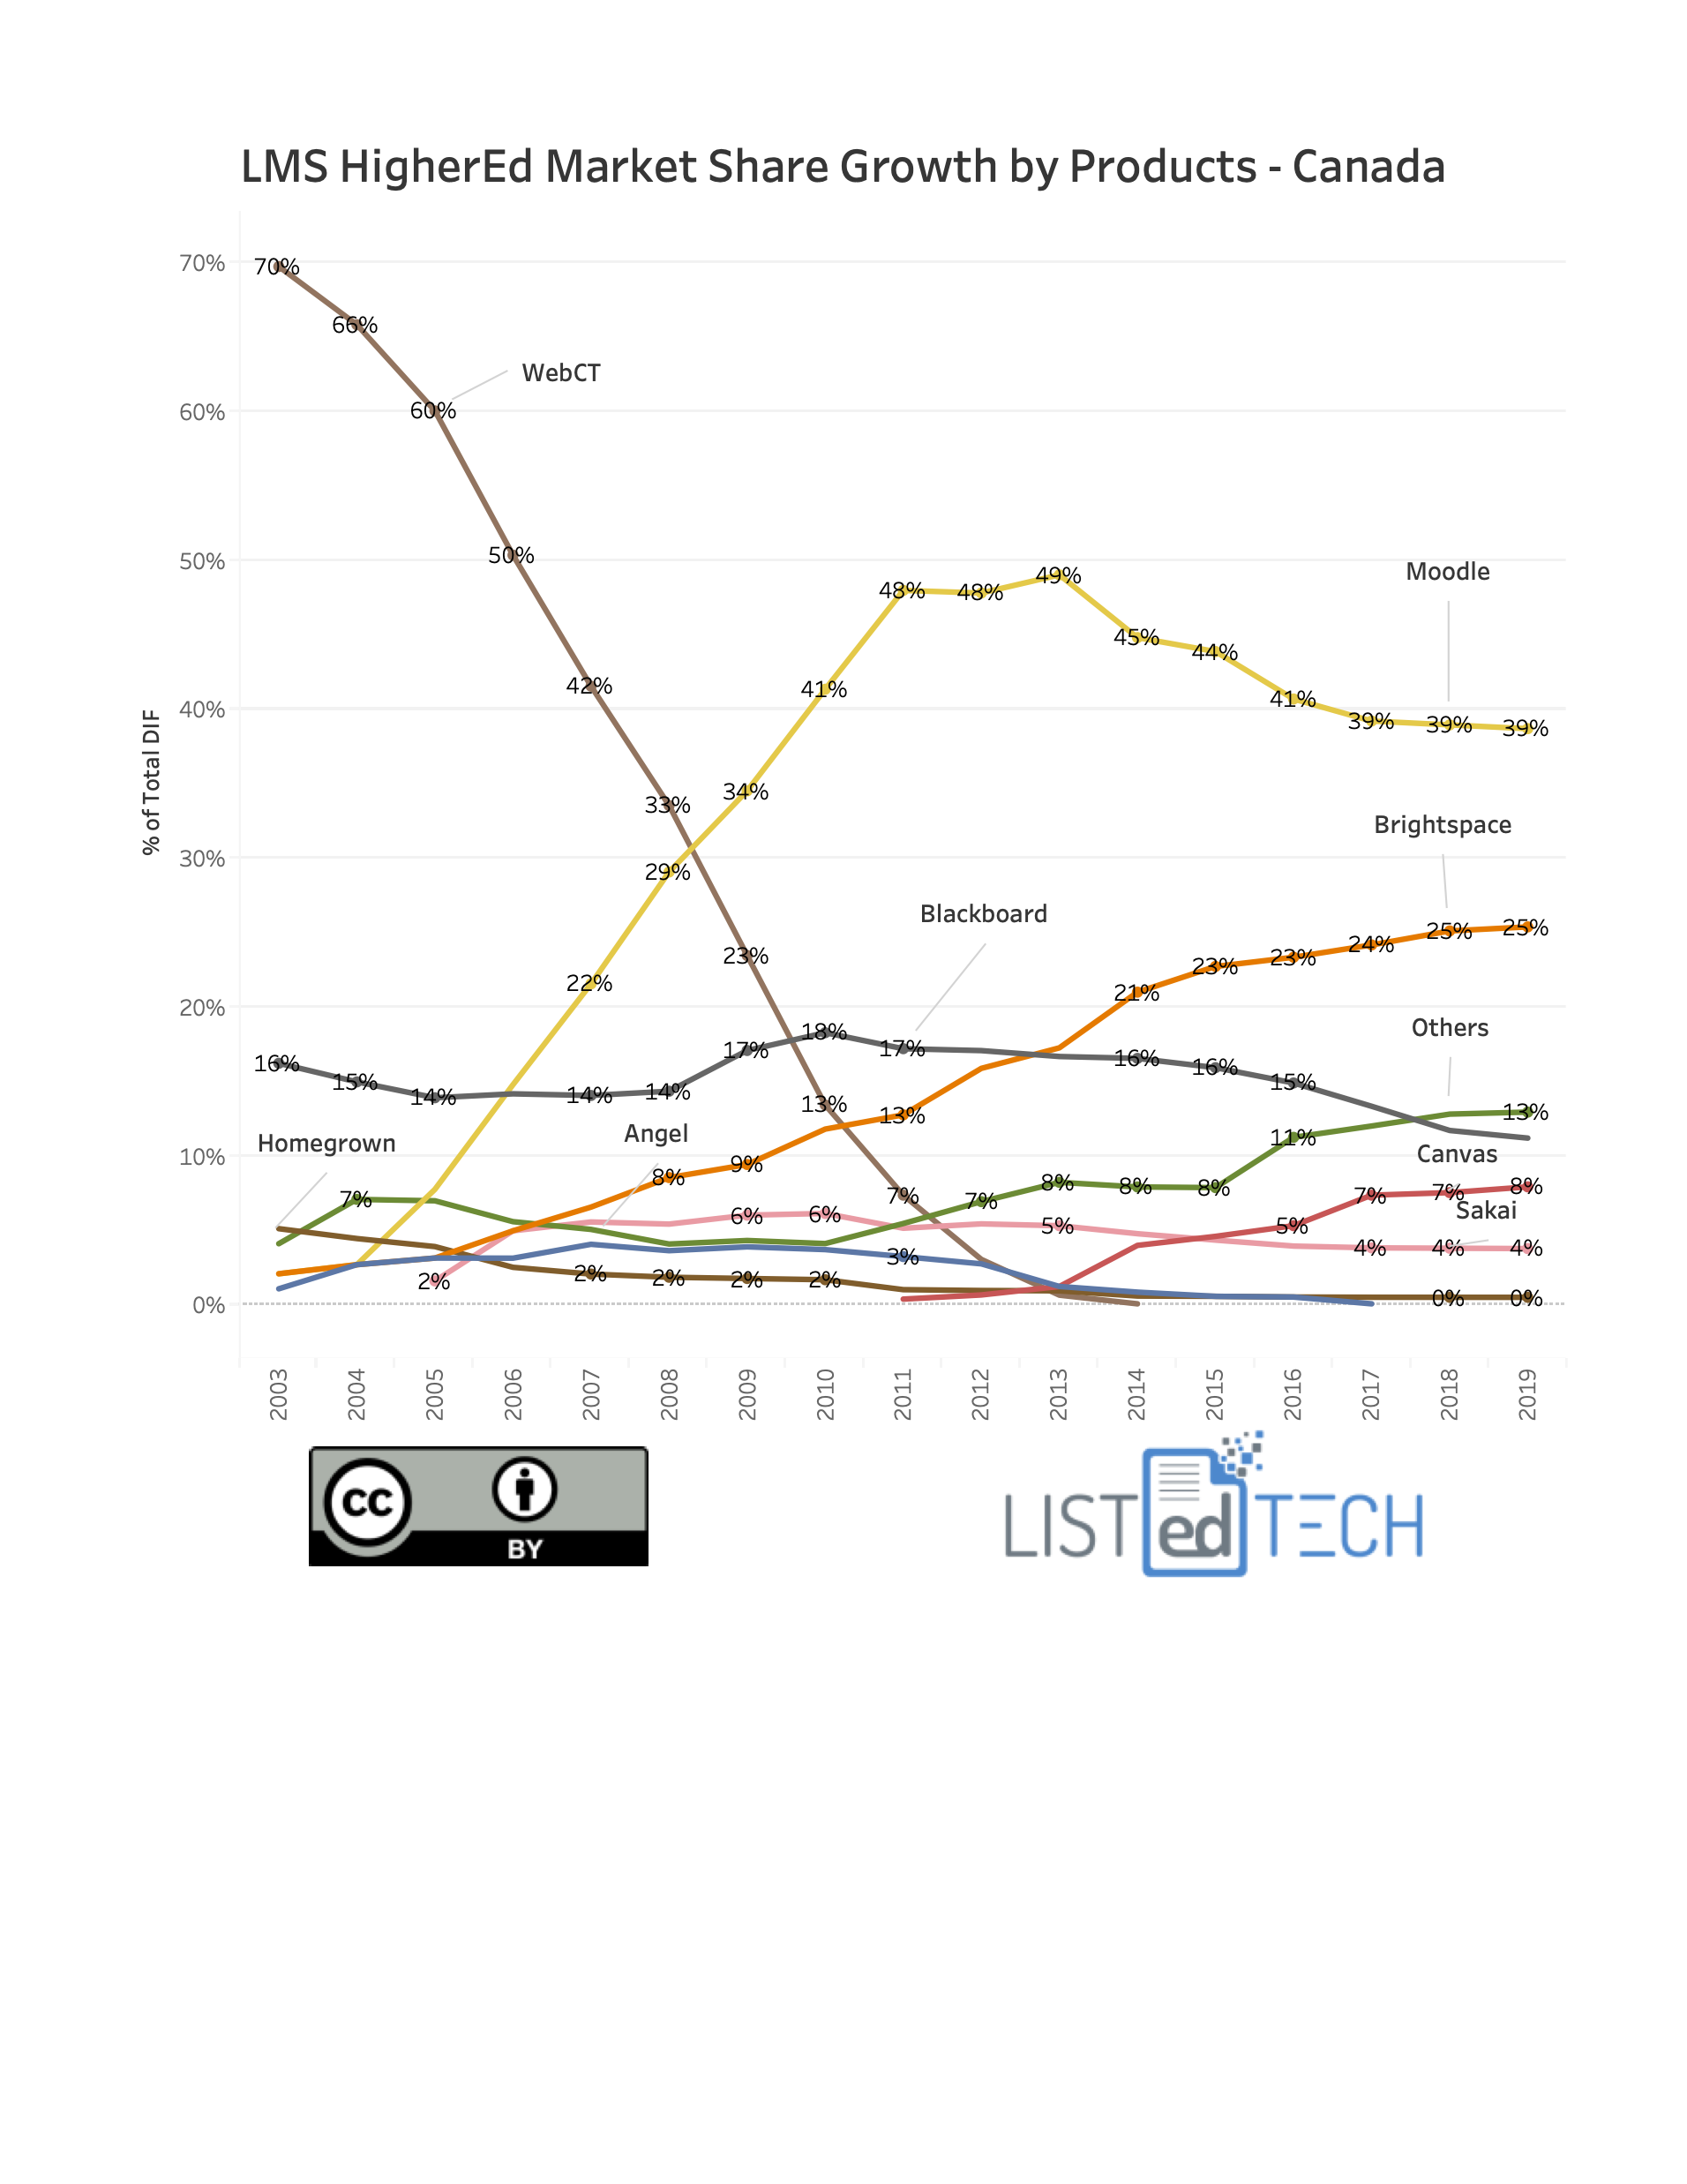 LMS HigherEd Market Share Growth by Products - LisTedTECH